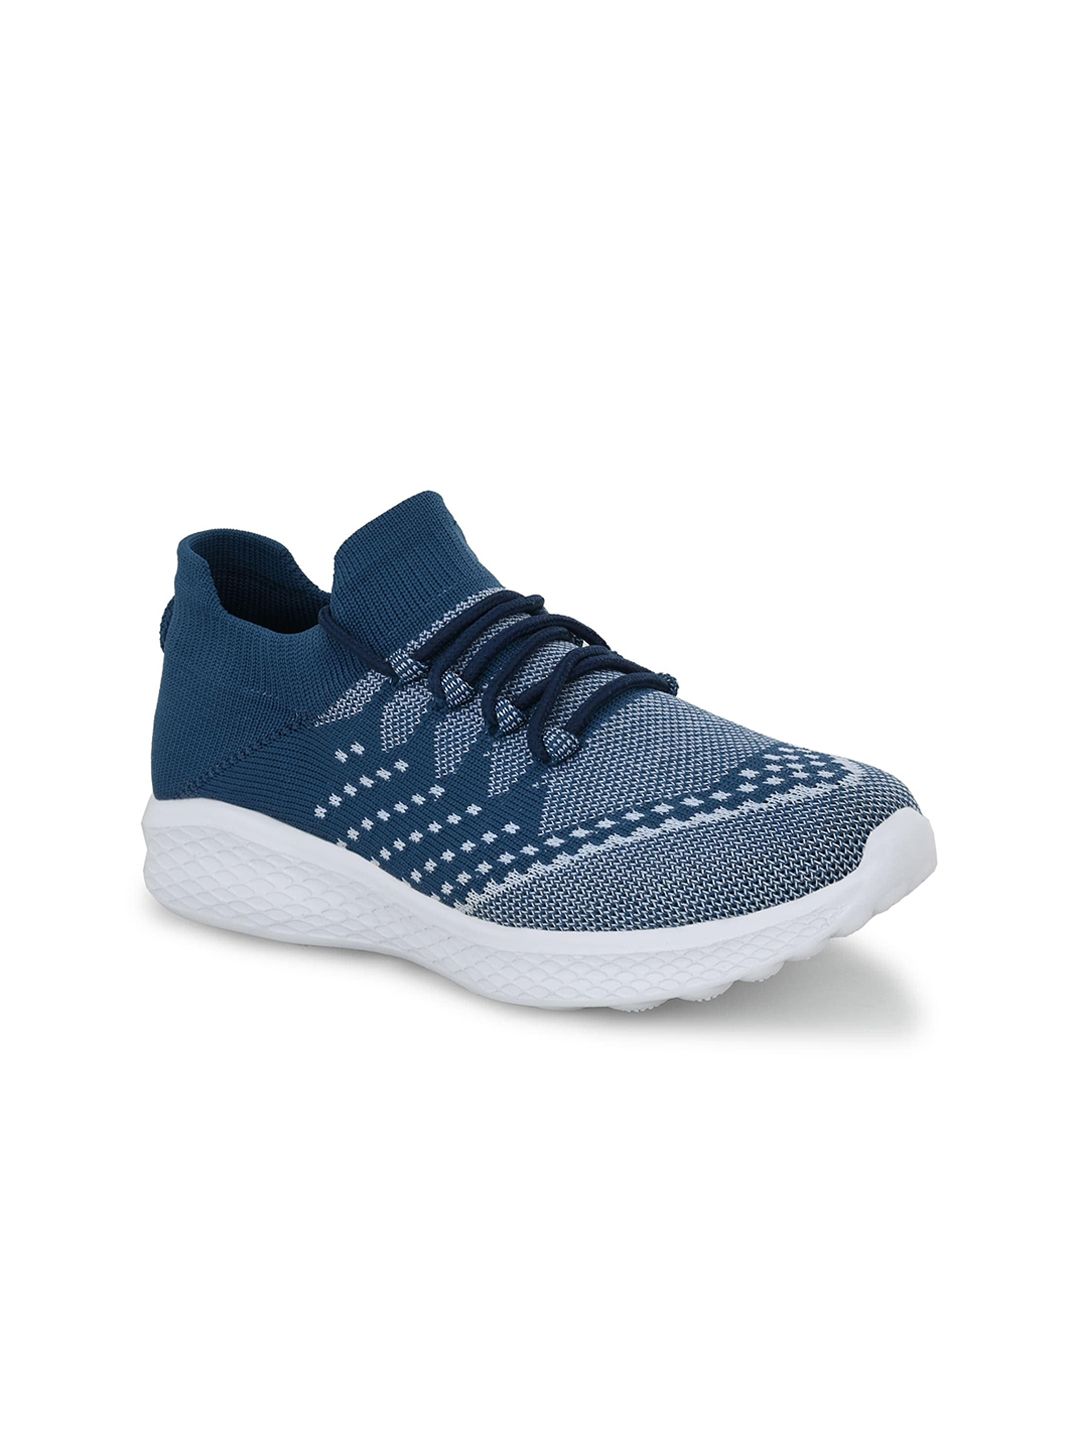 Mast & Harbour Women Blue Woven Design Sneakers Price in India